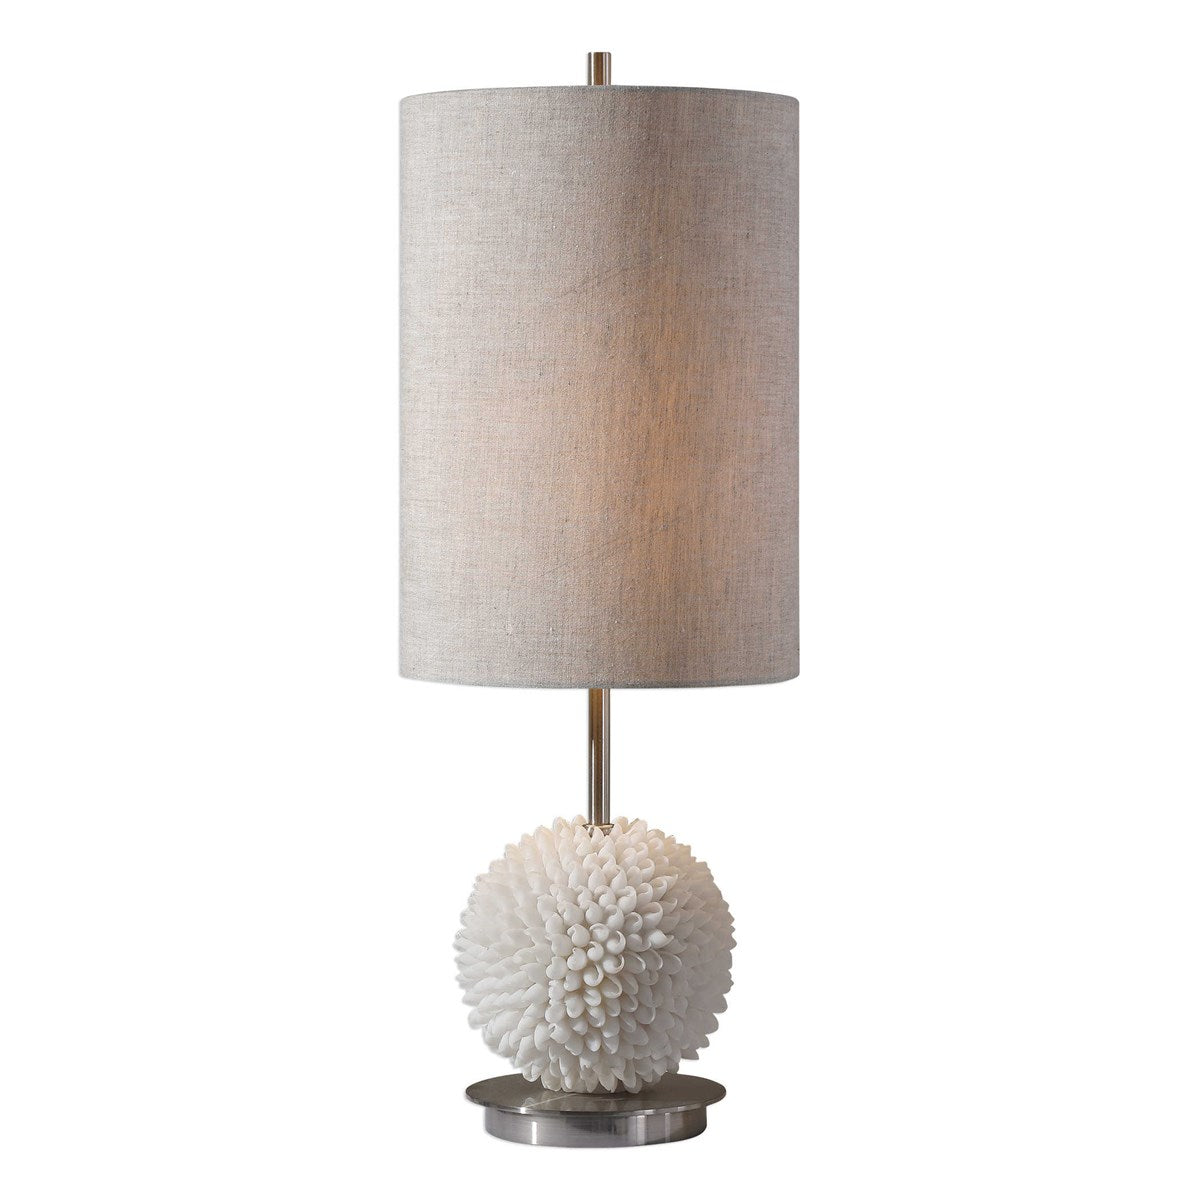 Cascara Sea Shells Lamp-Uttermost-UTTM-29613-1-Table Lamps-1-France and Son